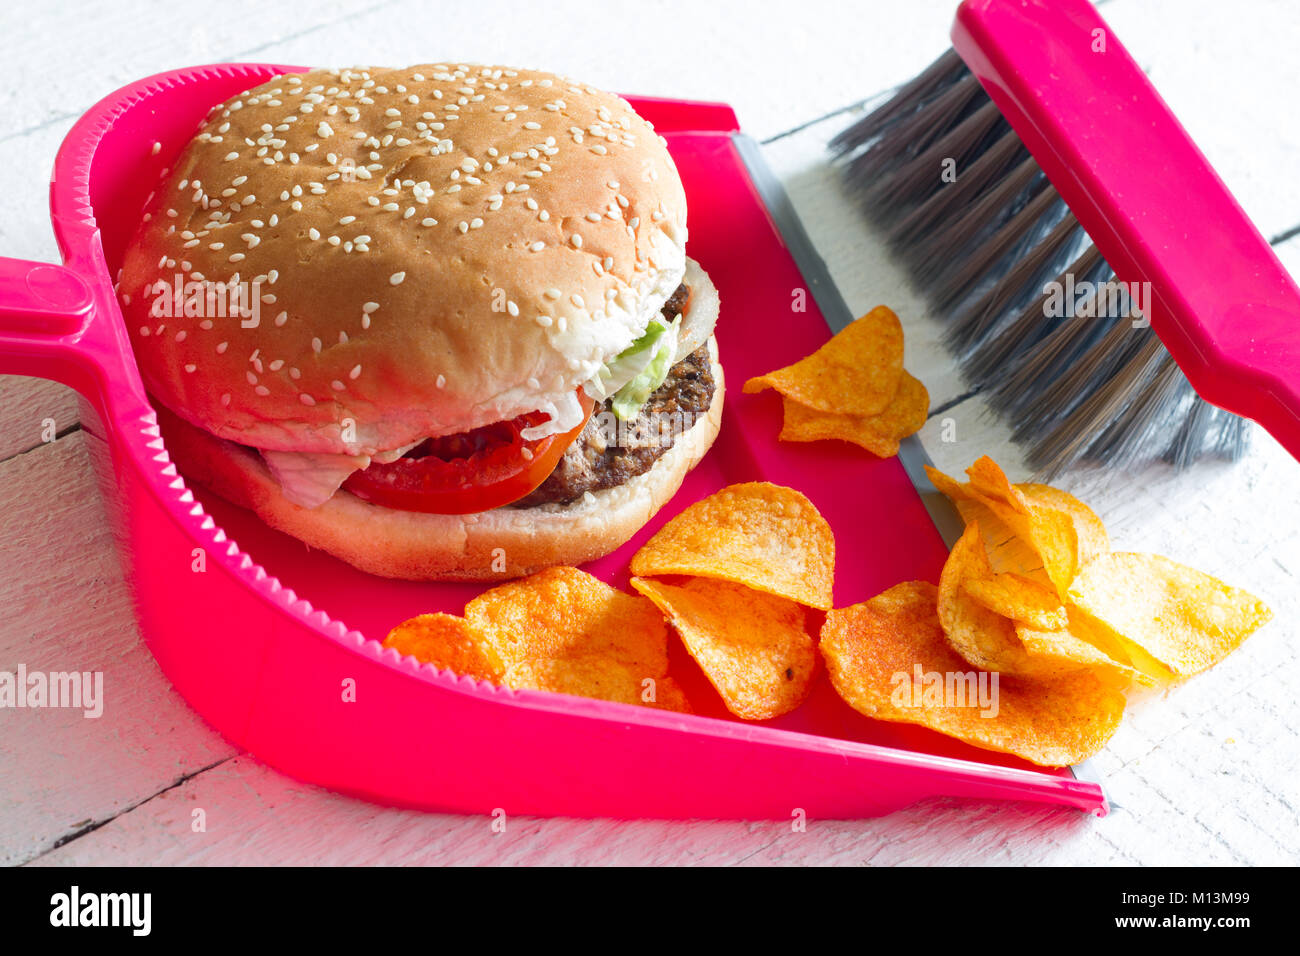 Sweeping junk food with burger chips and dustpan concept of health detox diet Stock Photo